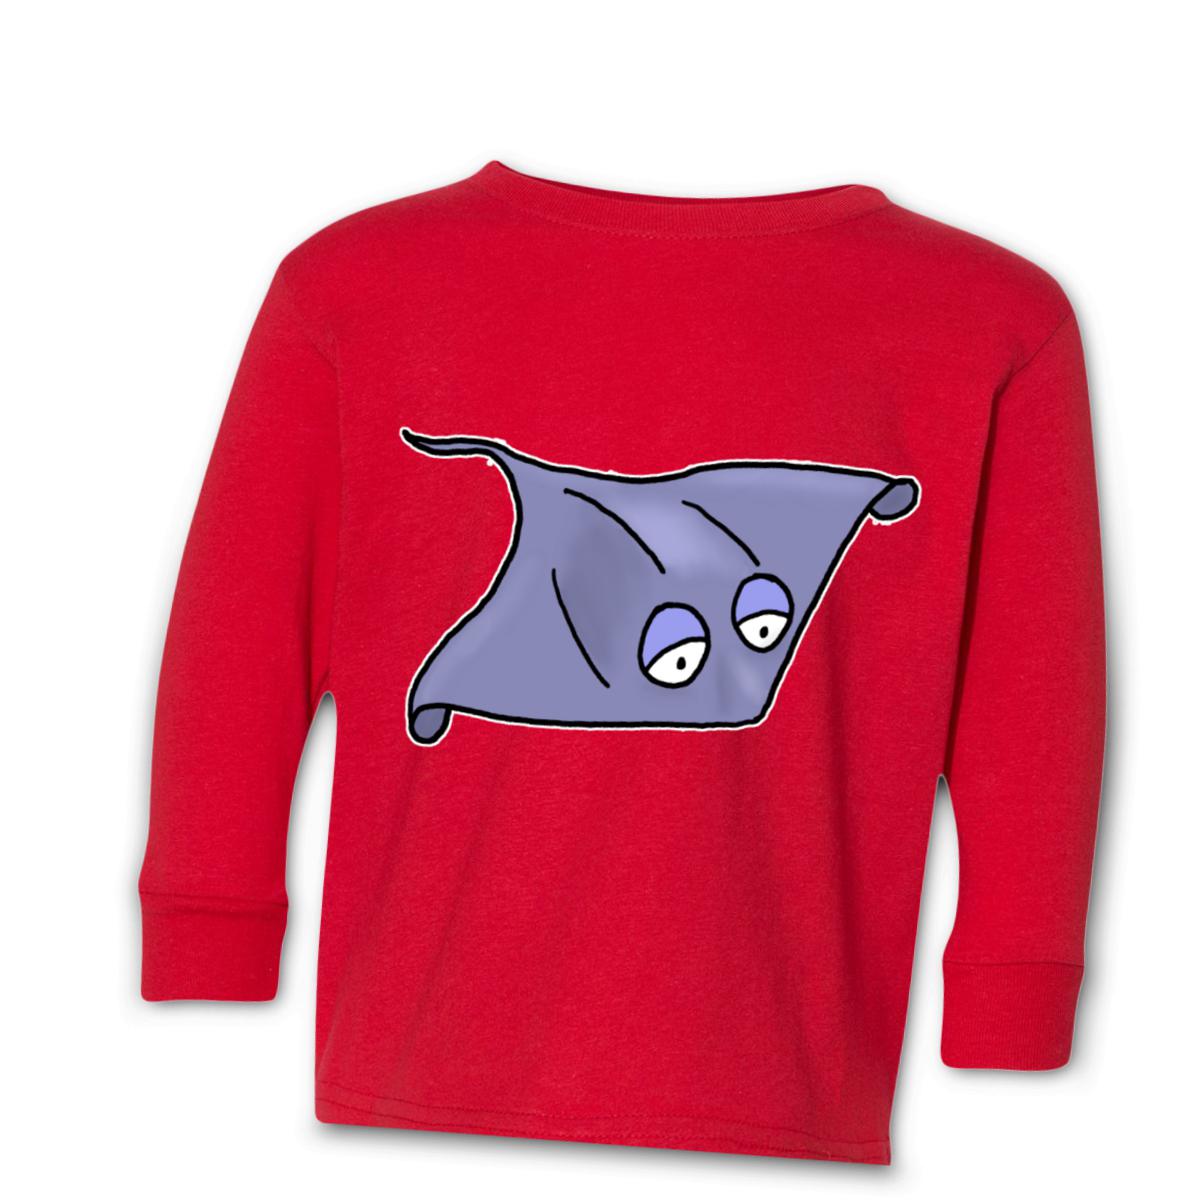 Stingray Toddler Long Sleeve Tee 2T red